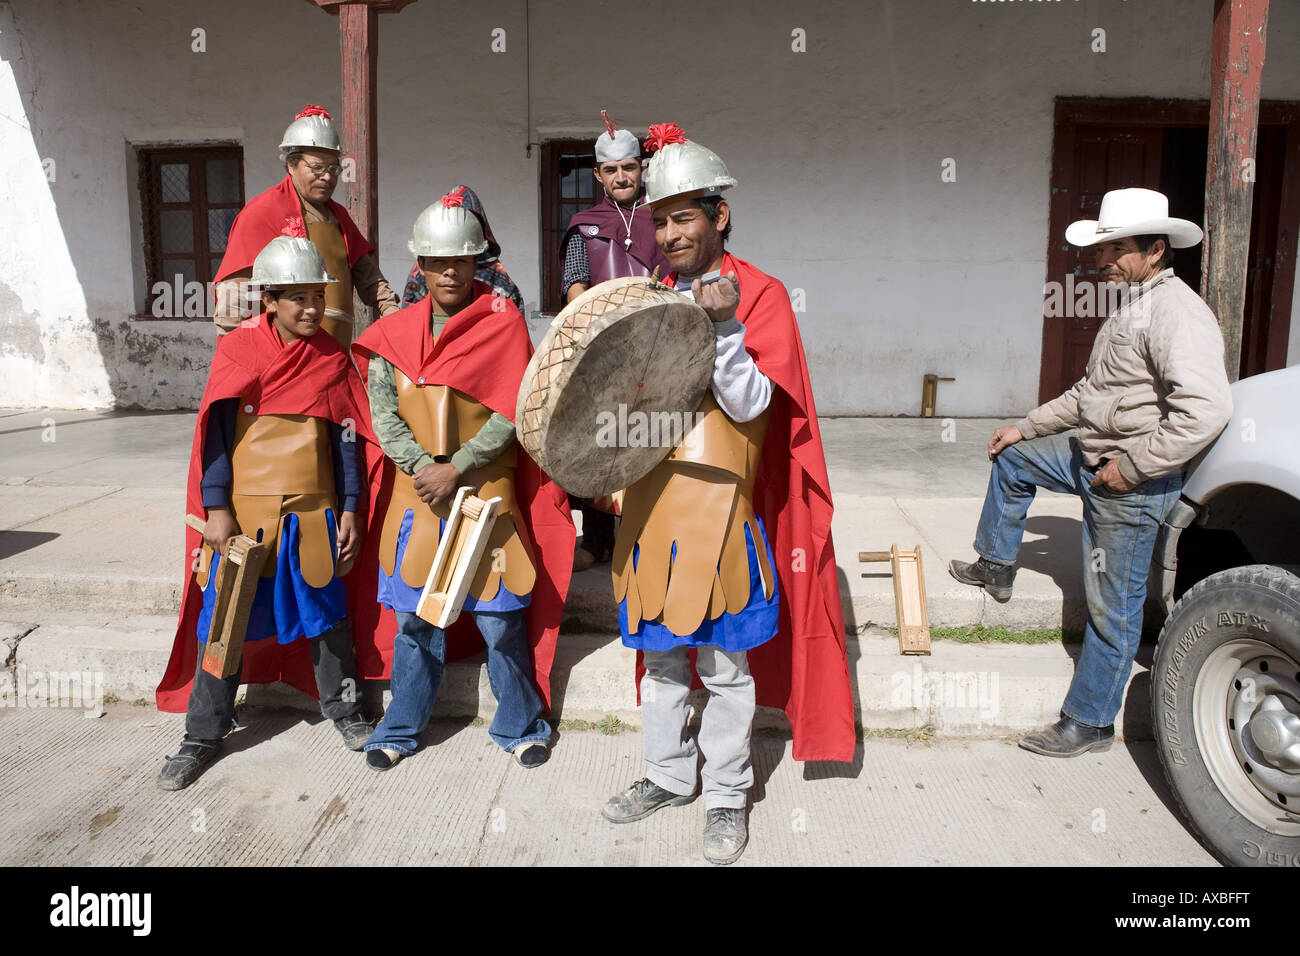 Carichi Mexico Roman soldiers reenactors in Carichi Chihuahua State before taking part in Easter celebrations Stock Photo